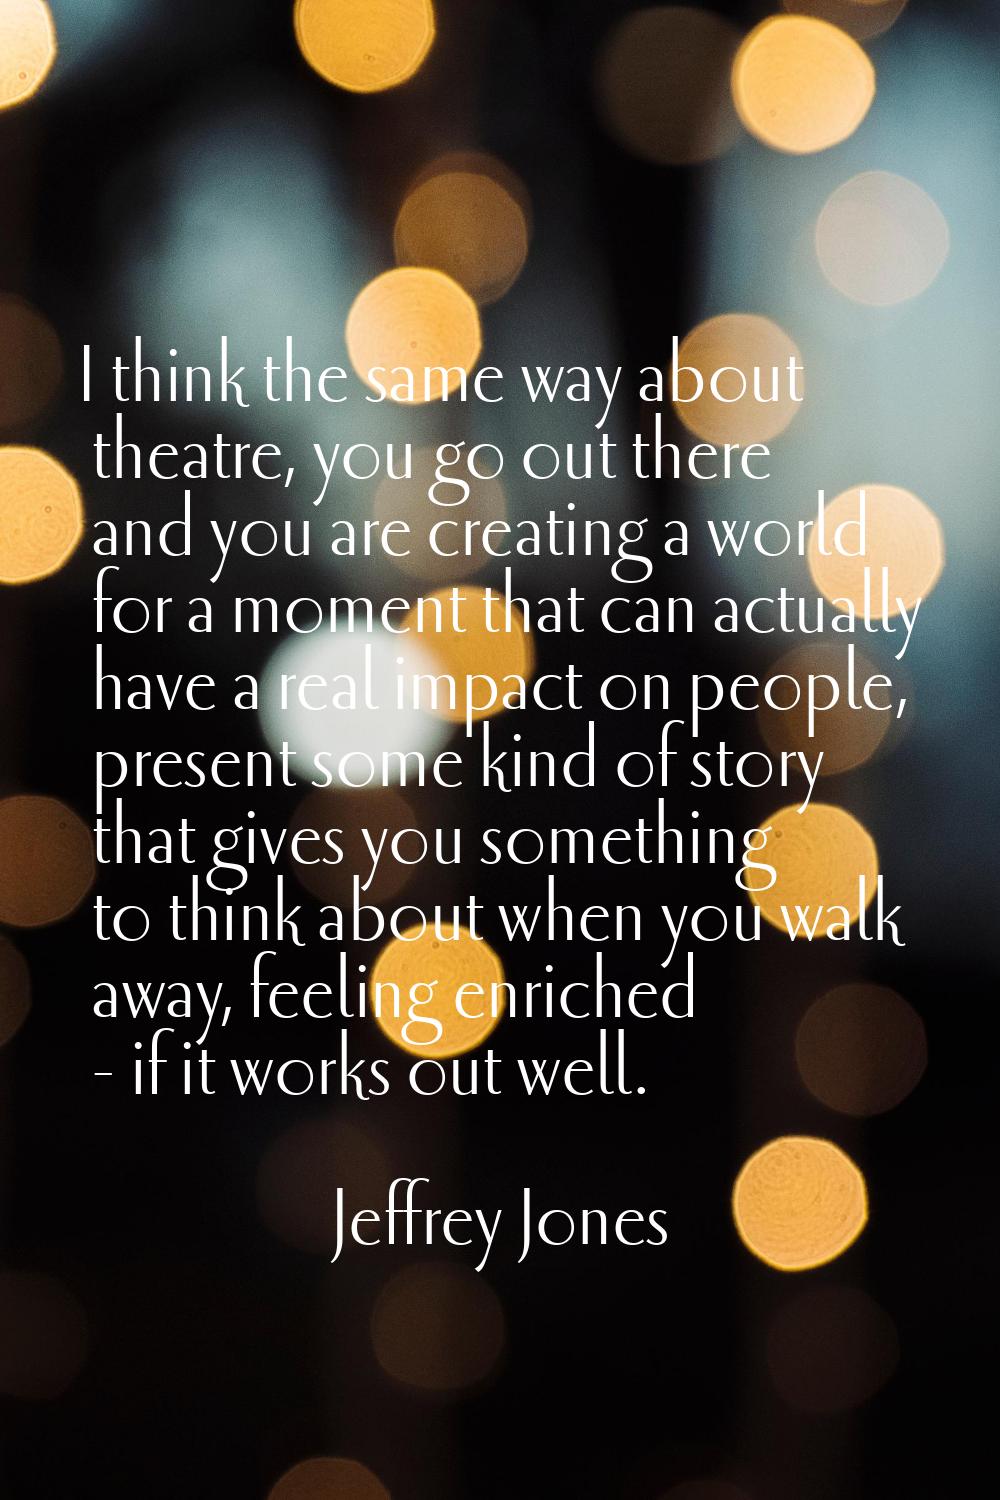 I think the same way about theatre, you go out there and you are creating a world for a moment that